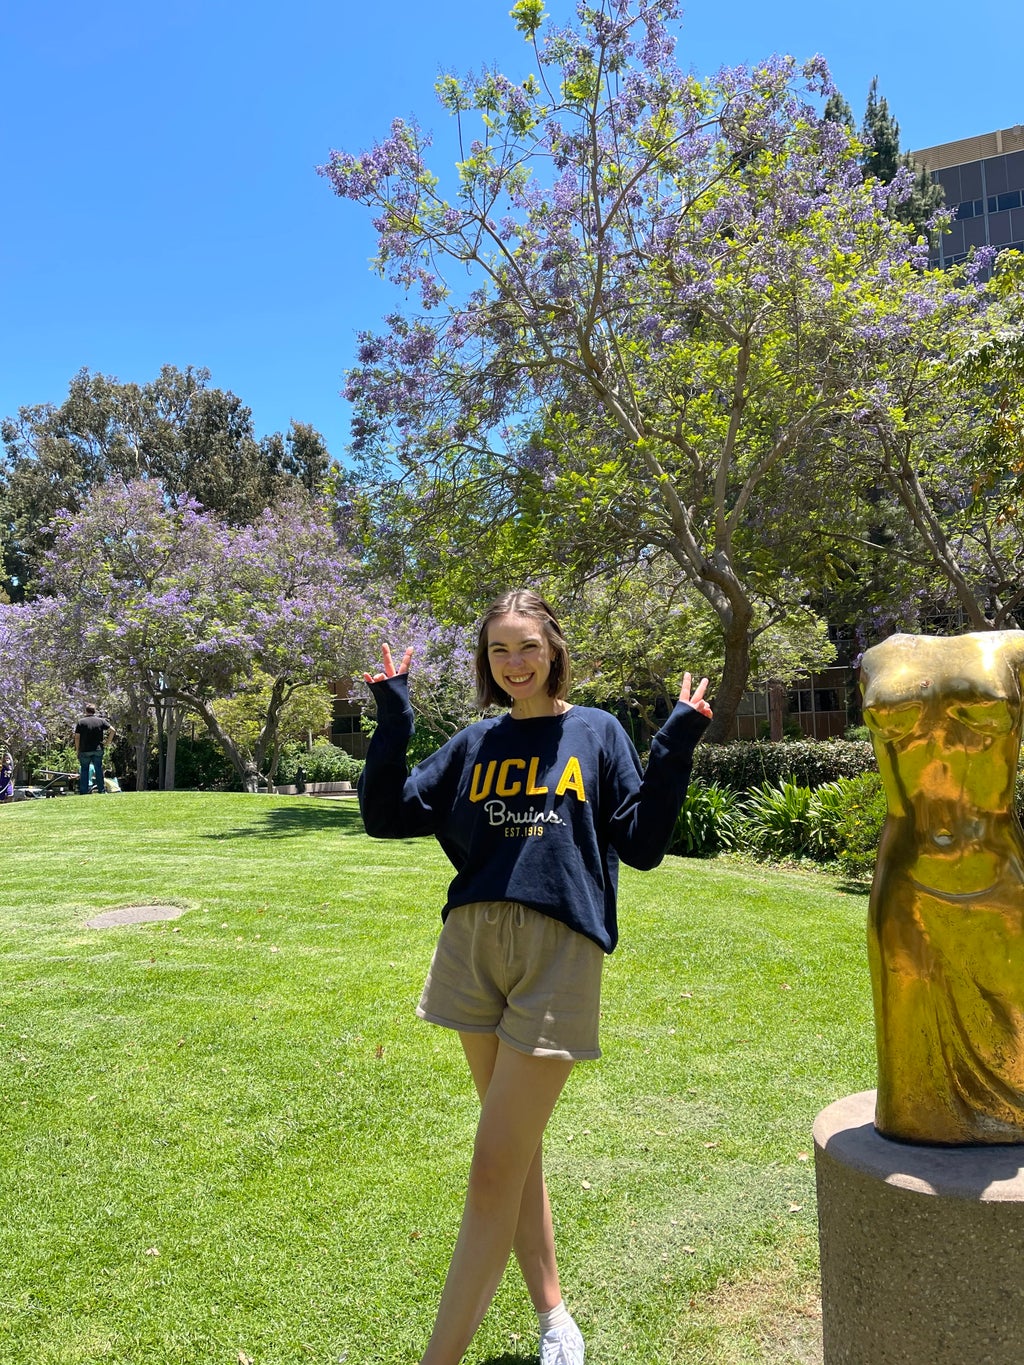 A girl stands in a UCLA sweater in a sunny sculpture garden.